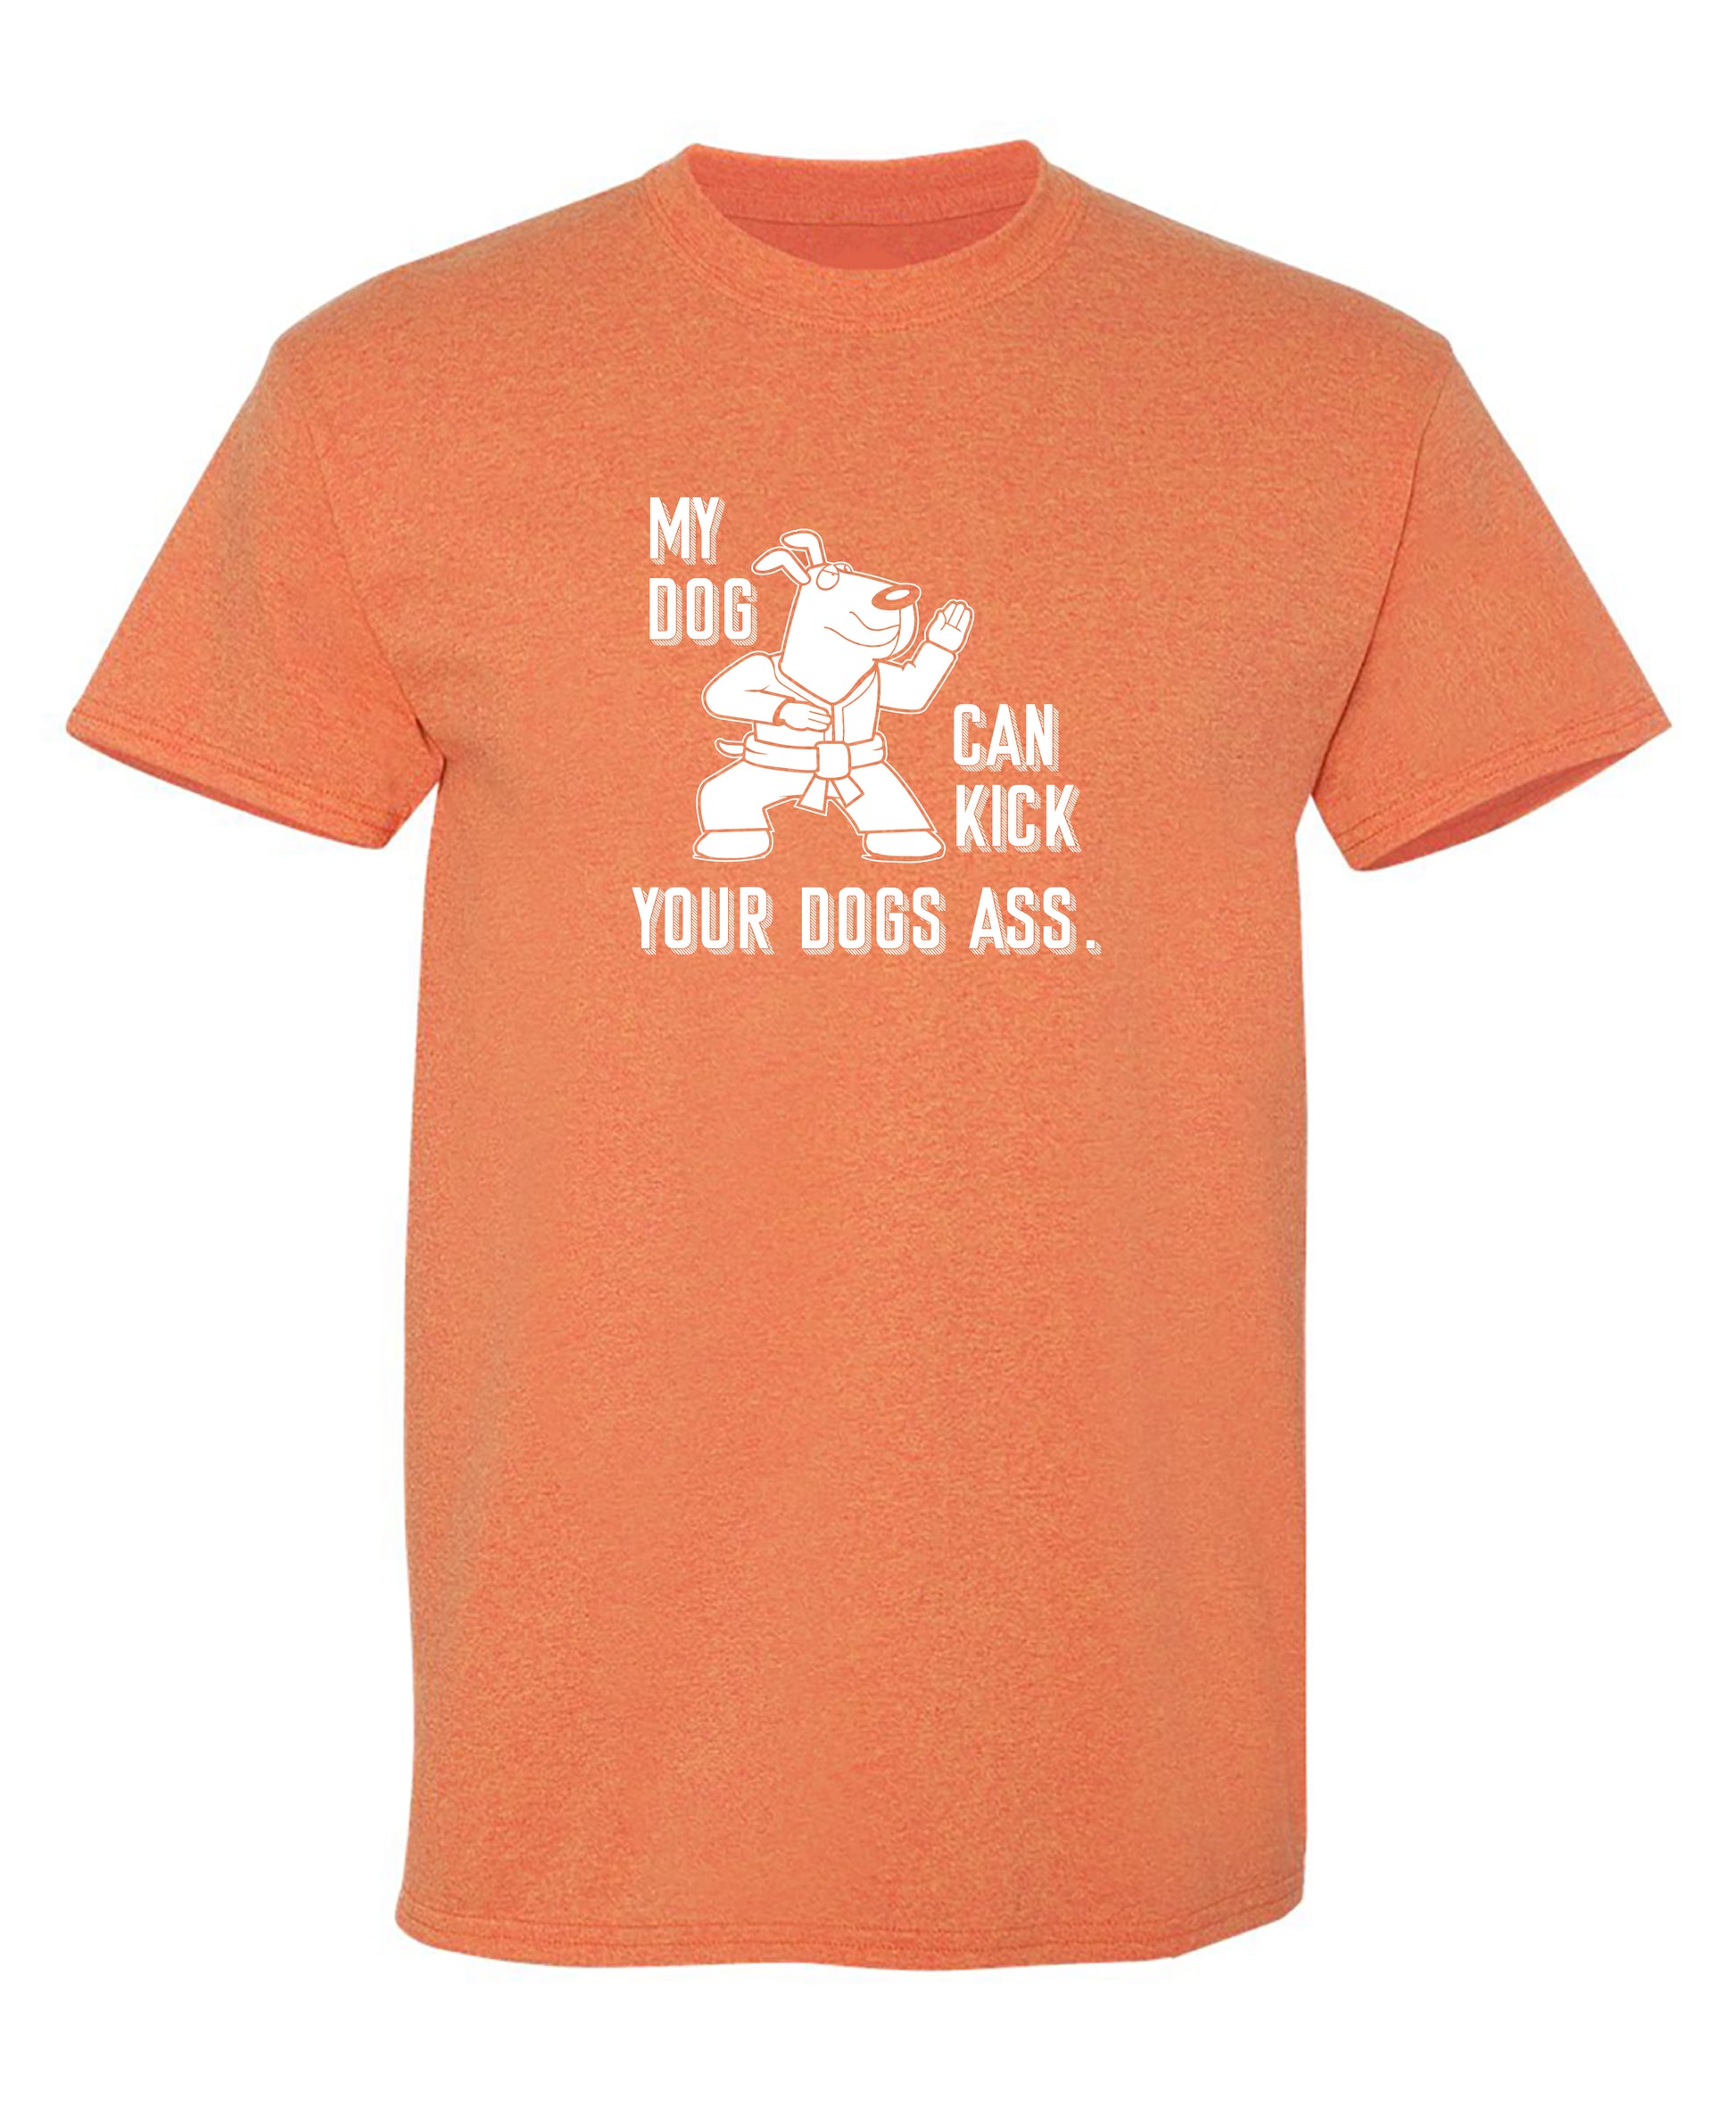 My Dog Can Kick Your Dogs Ass. - Funny T Shirts & Graphic Tees